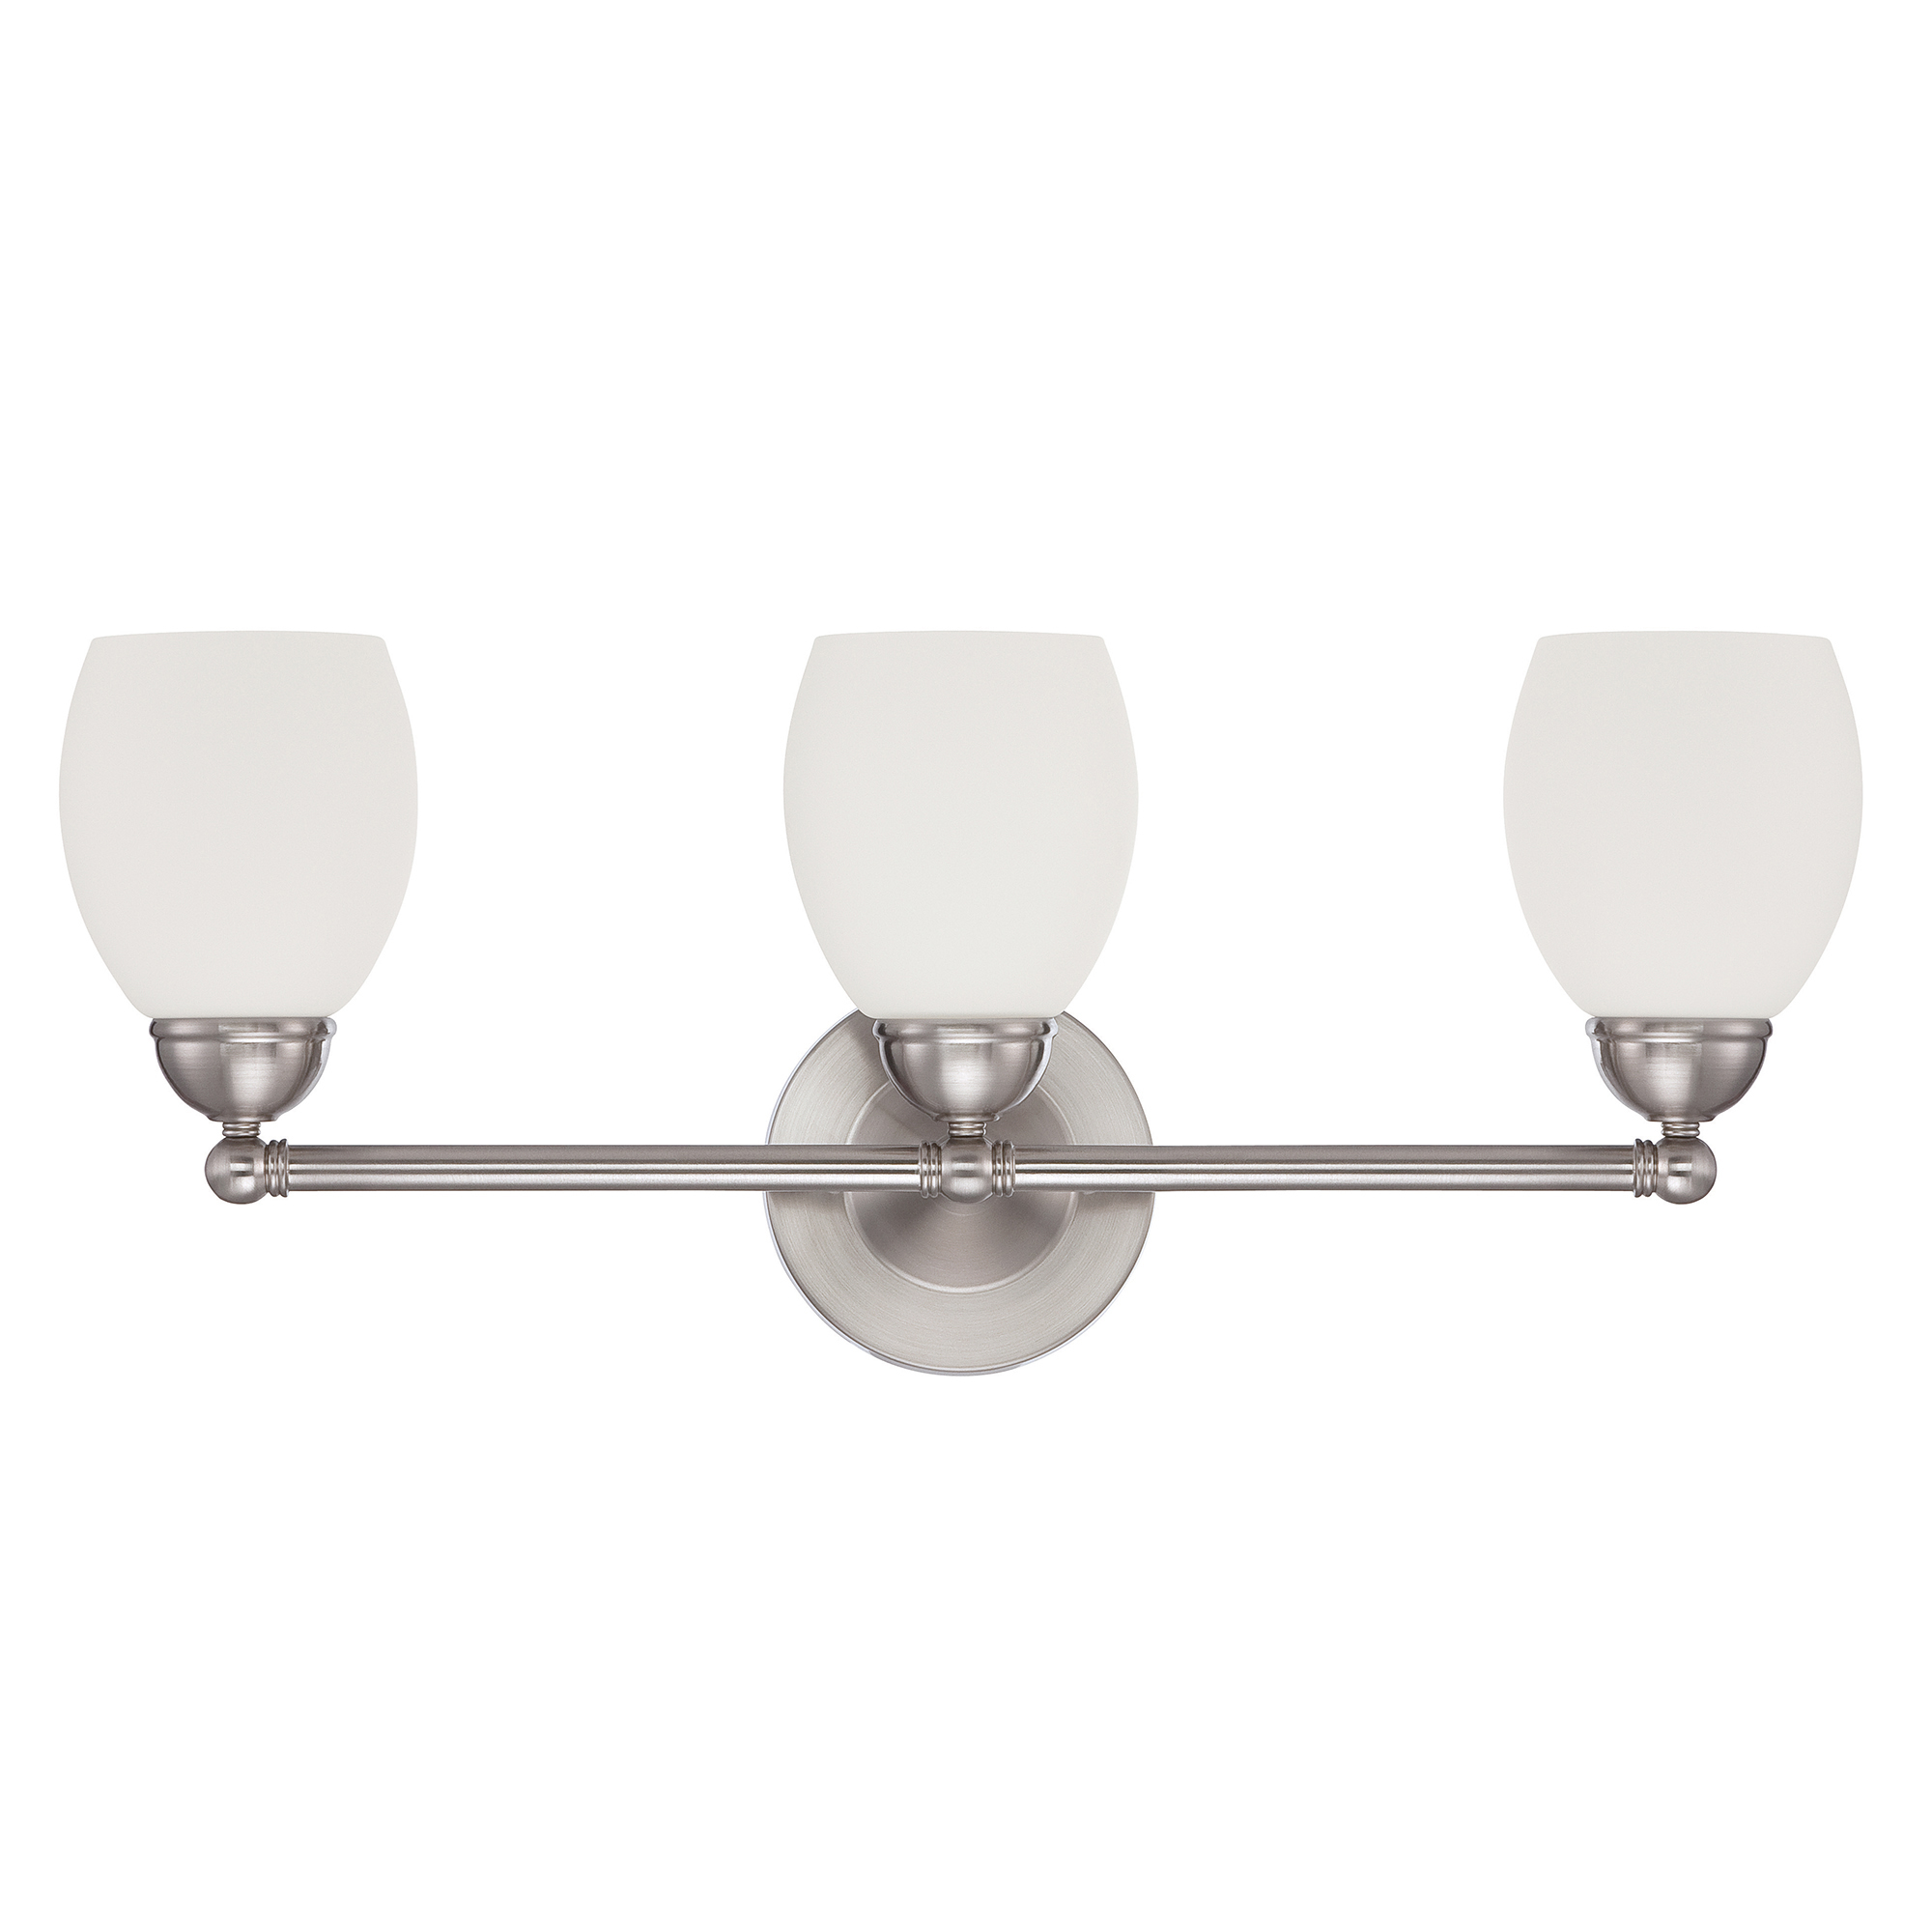 Sunset Lighting Three Light Olen Vanity - Opal Glass, Dimmable - with Bright Satin Nickel Finish